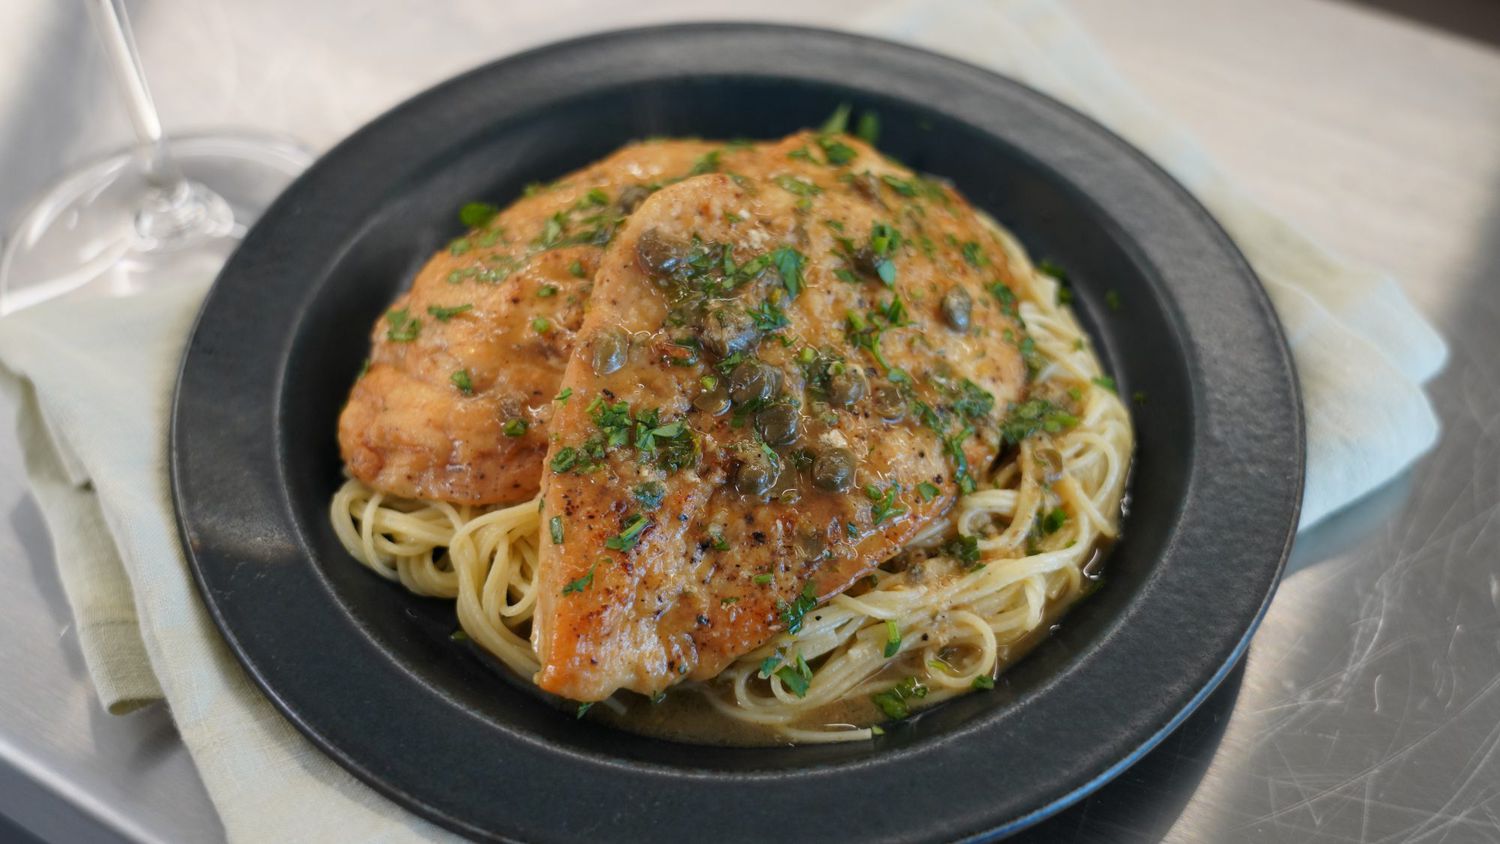 chicken breasts on pasta in a black bowl